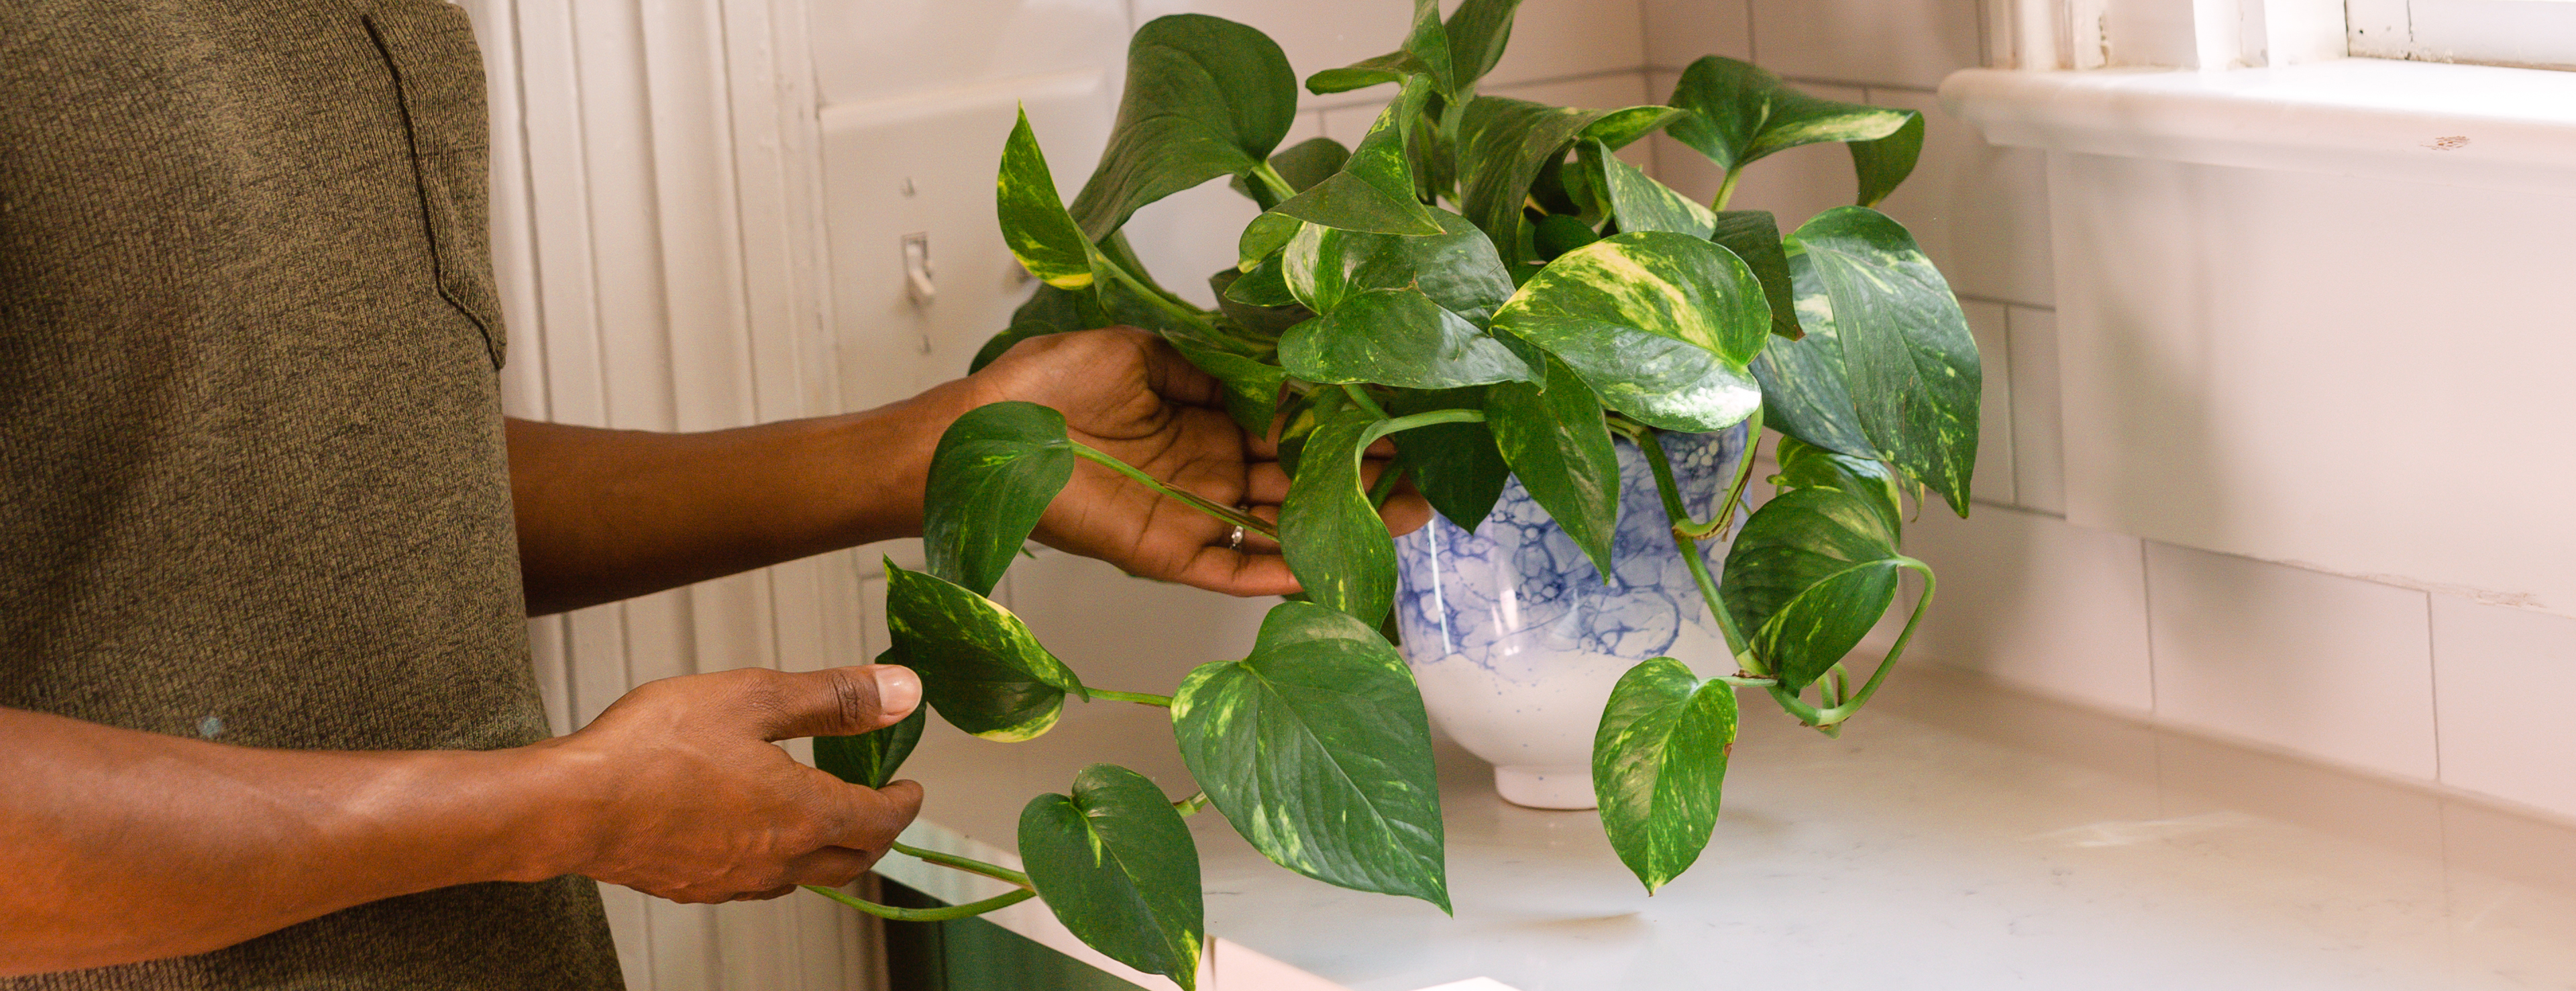 Hands holding leaves of pothos plant